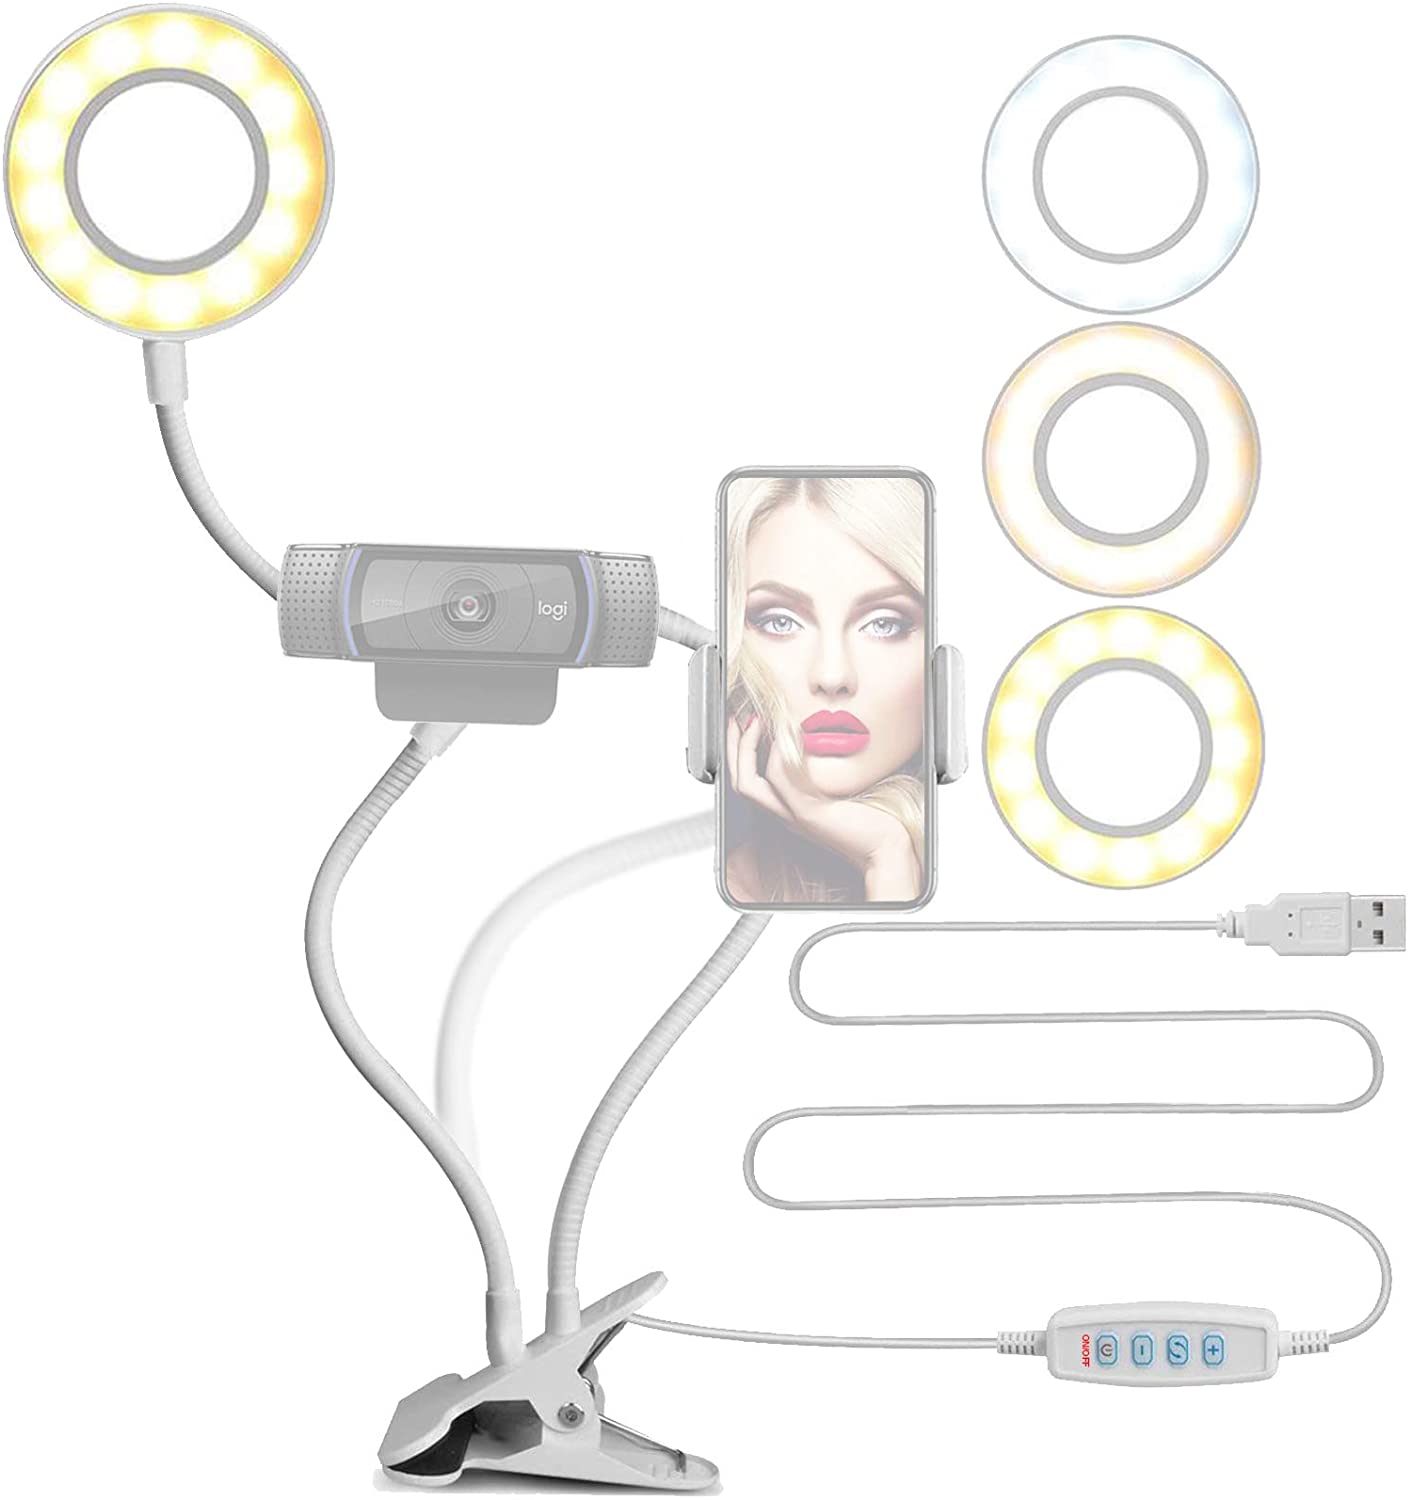 Single Ring Light with 3 Lighting Modes and phone/webcam holder (White)